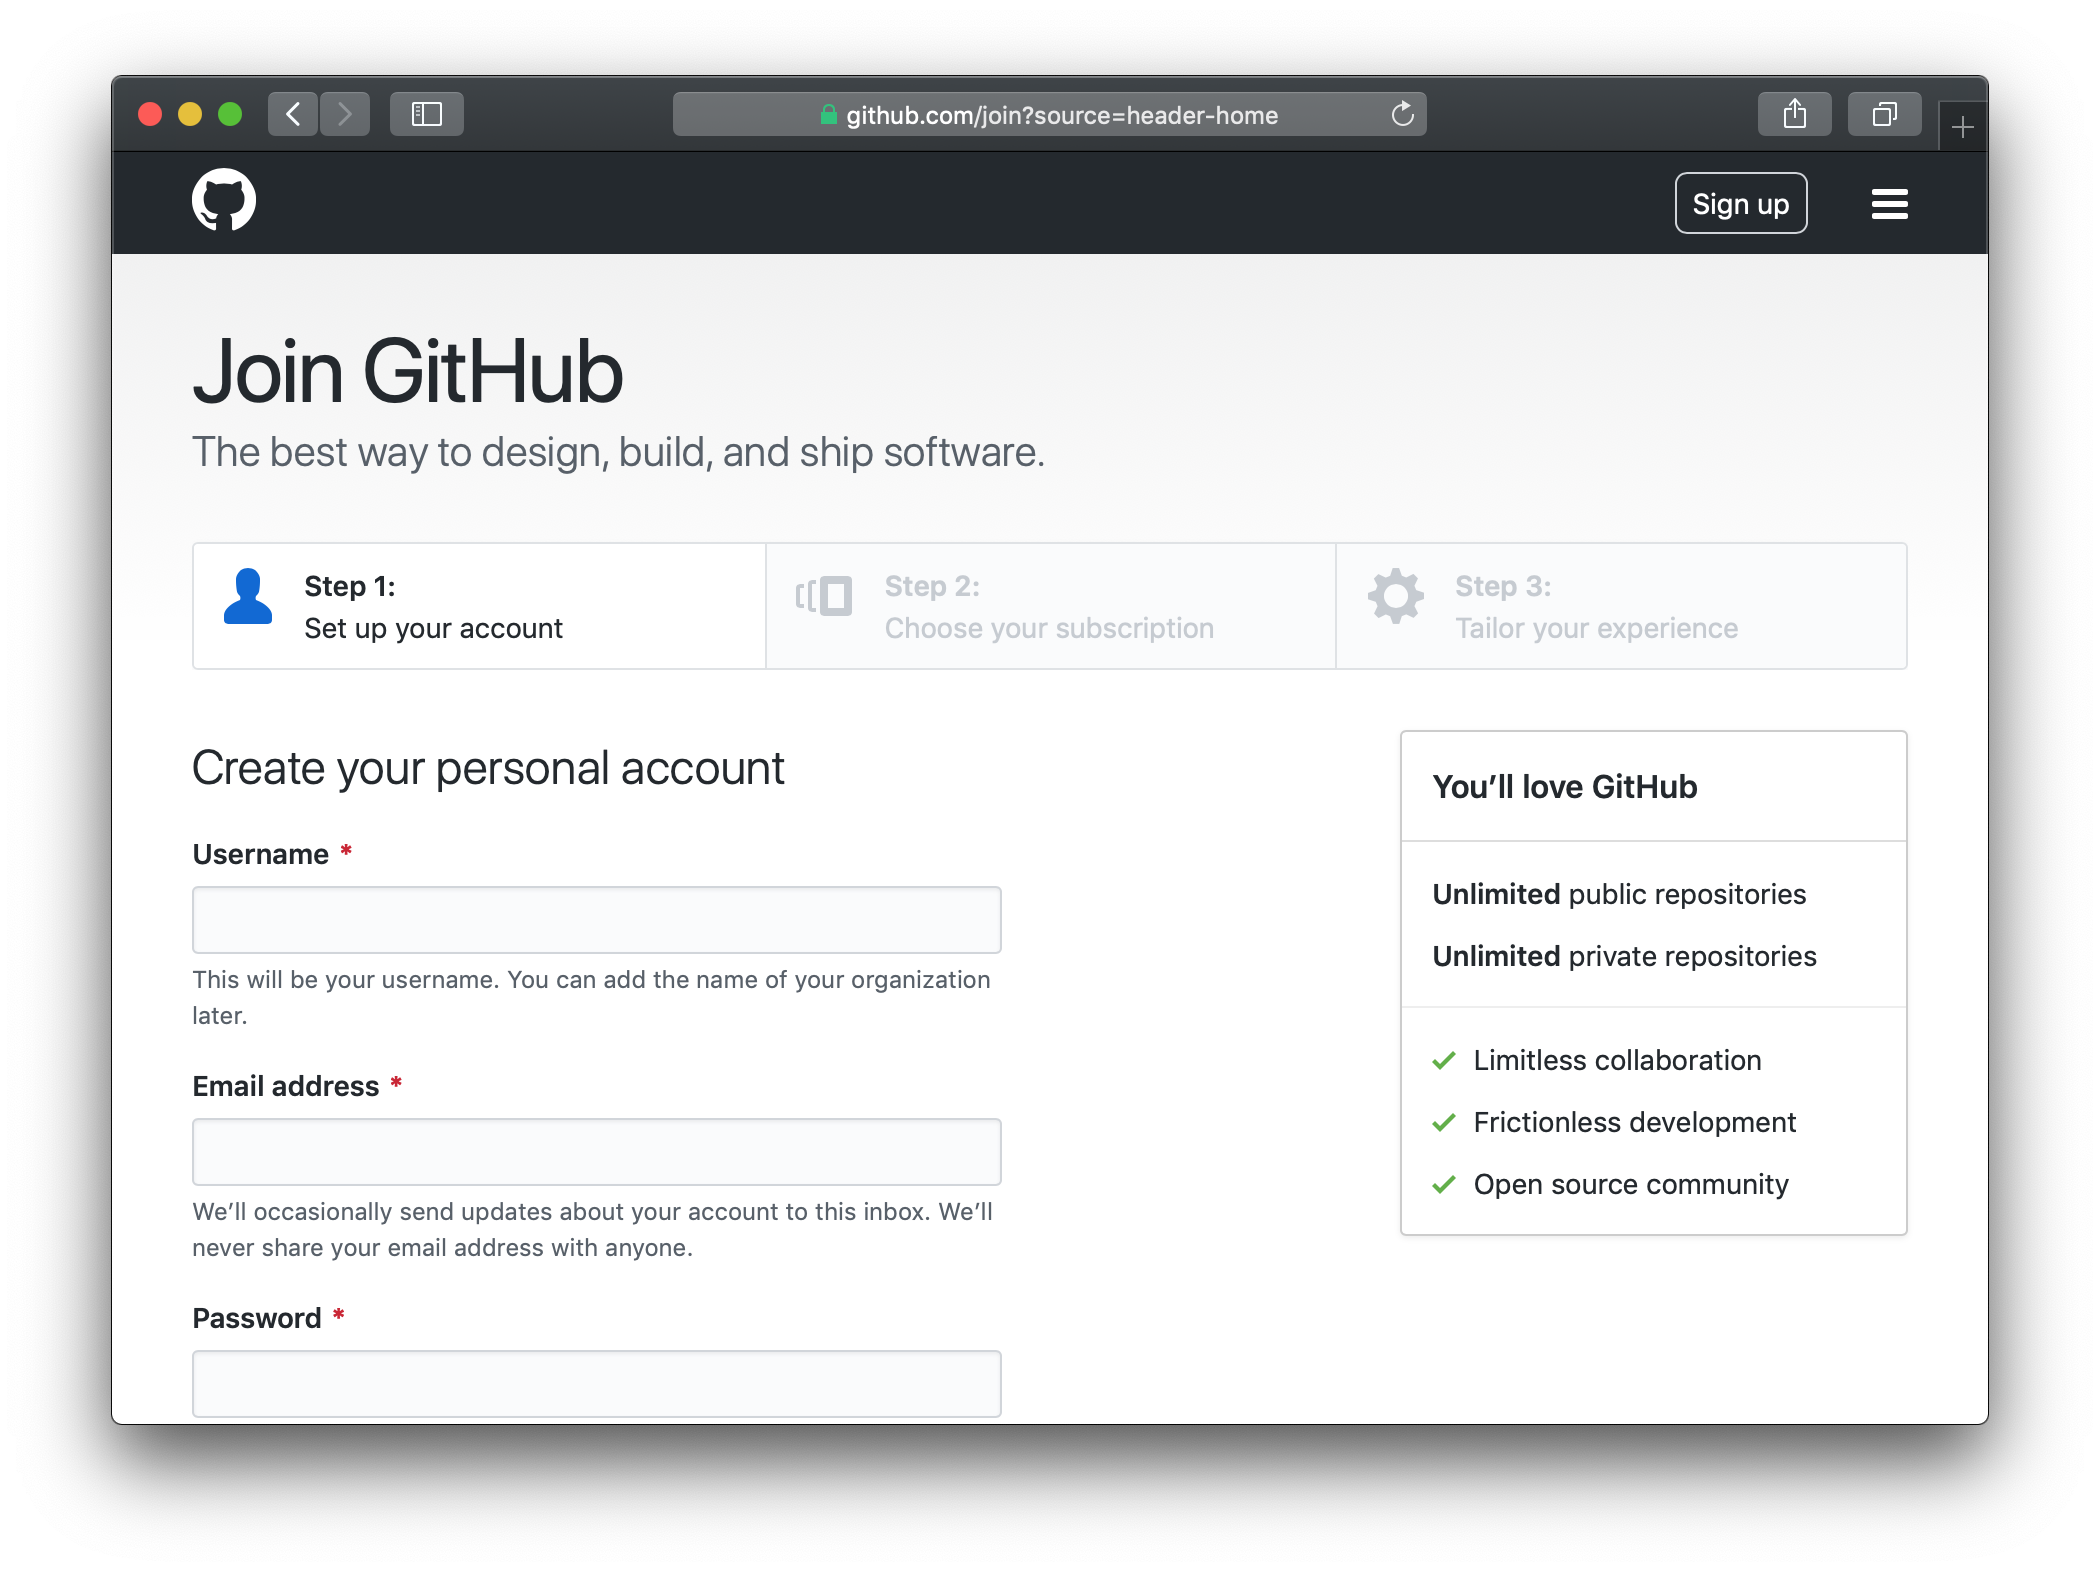 The GitHub sign-up screen with space to add a username, email address and password.